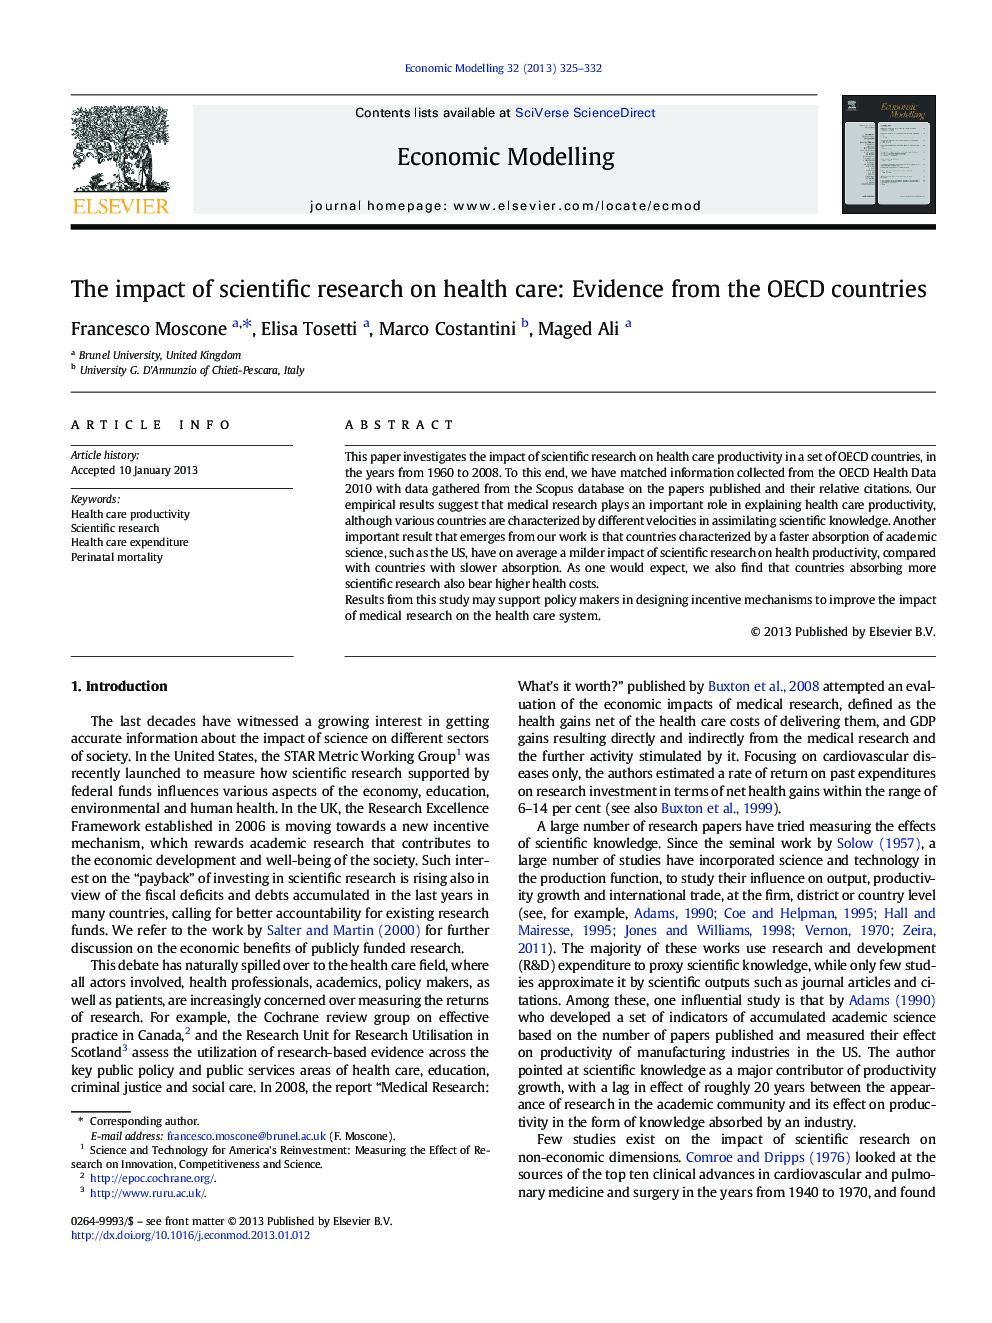 The impact of scientific research on health care: Evidence from the OECD countries